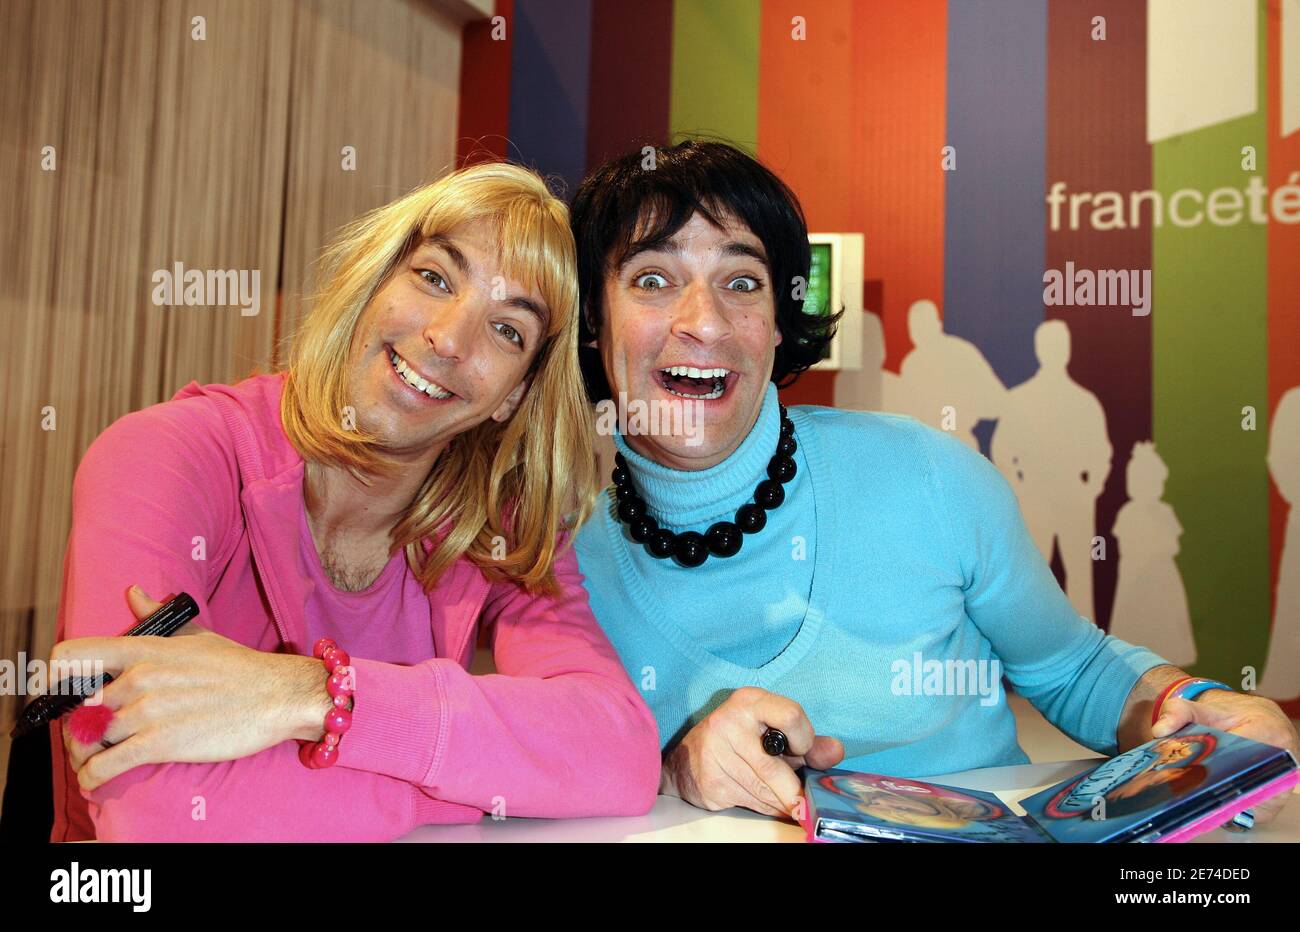 French actors Samantha and Chantal from the TV show on France 2 channel pose during the Book Fair 'Le Salon Du Livre' held at Porte de Versailles, in Paris, France, on March 24, 2007. Photo by Denis Guignebourg/ABACAPRESS.COM Stock Photo